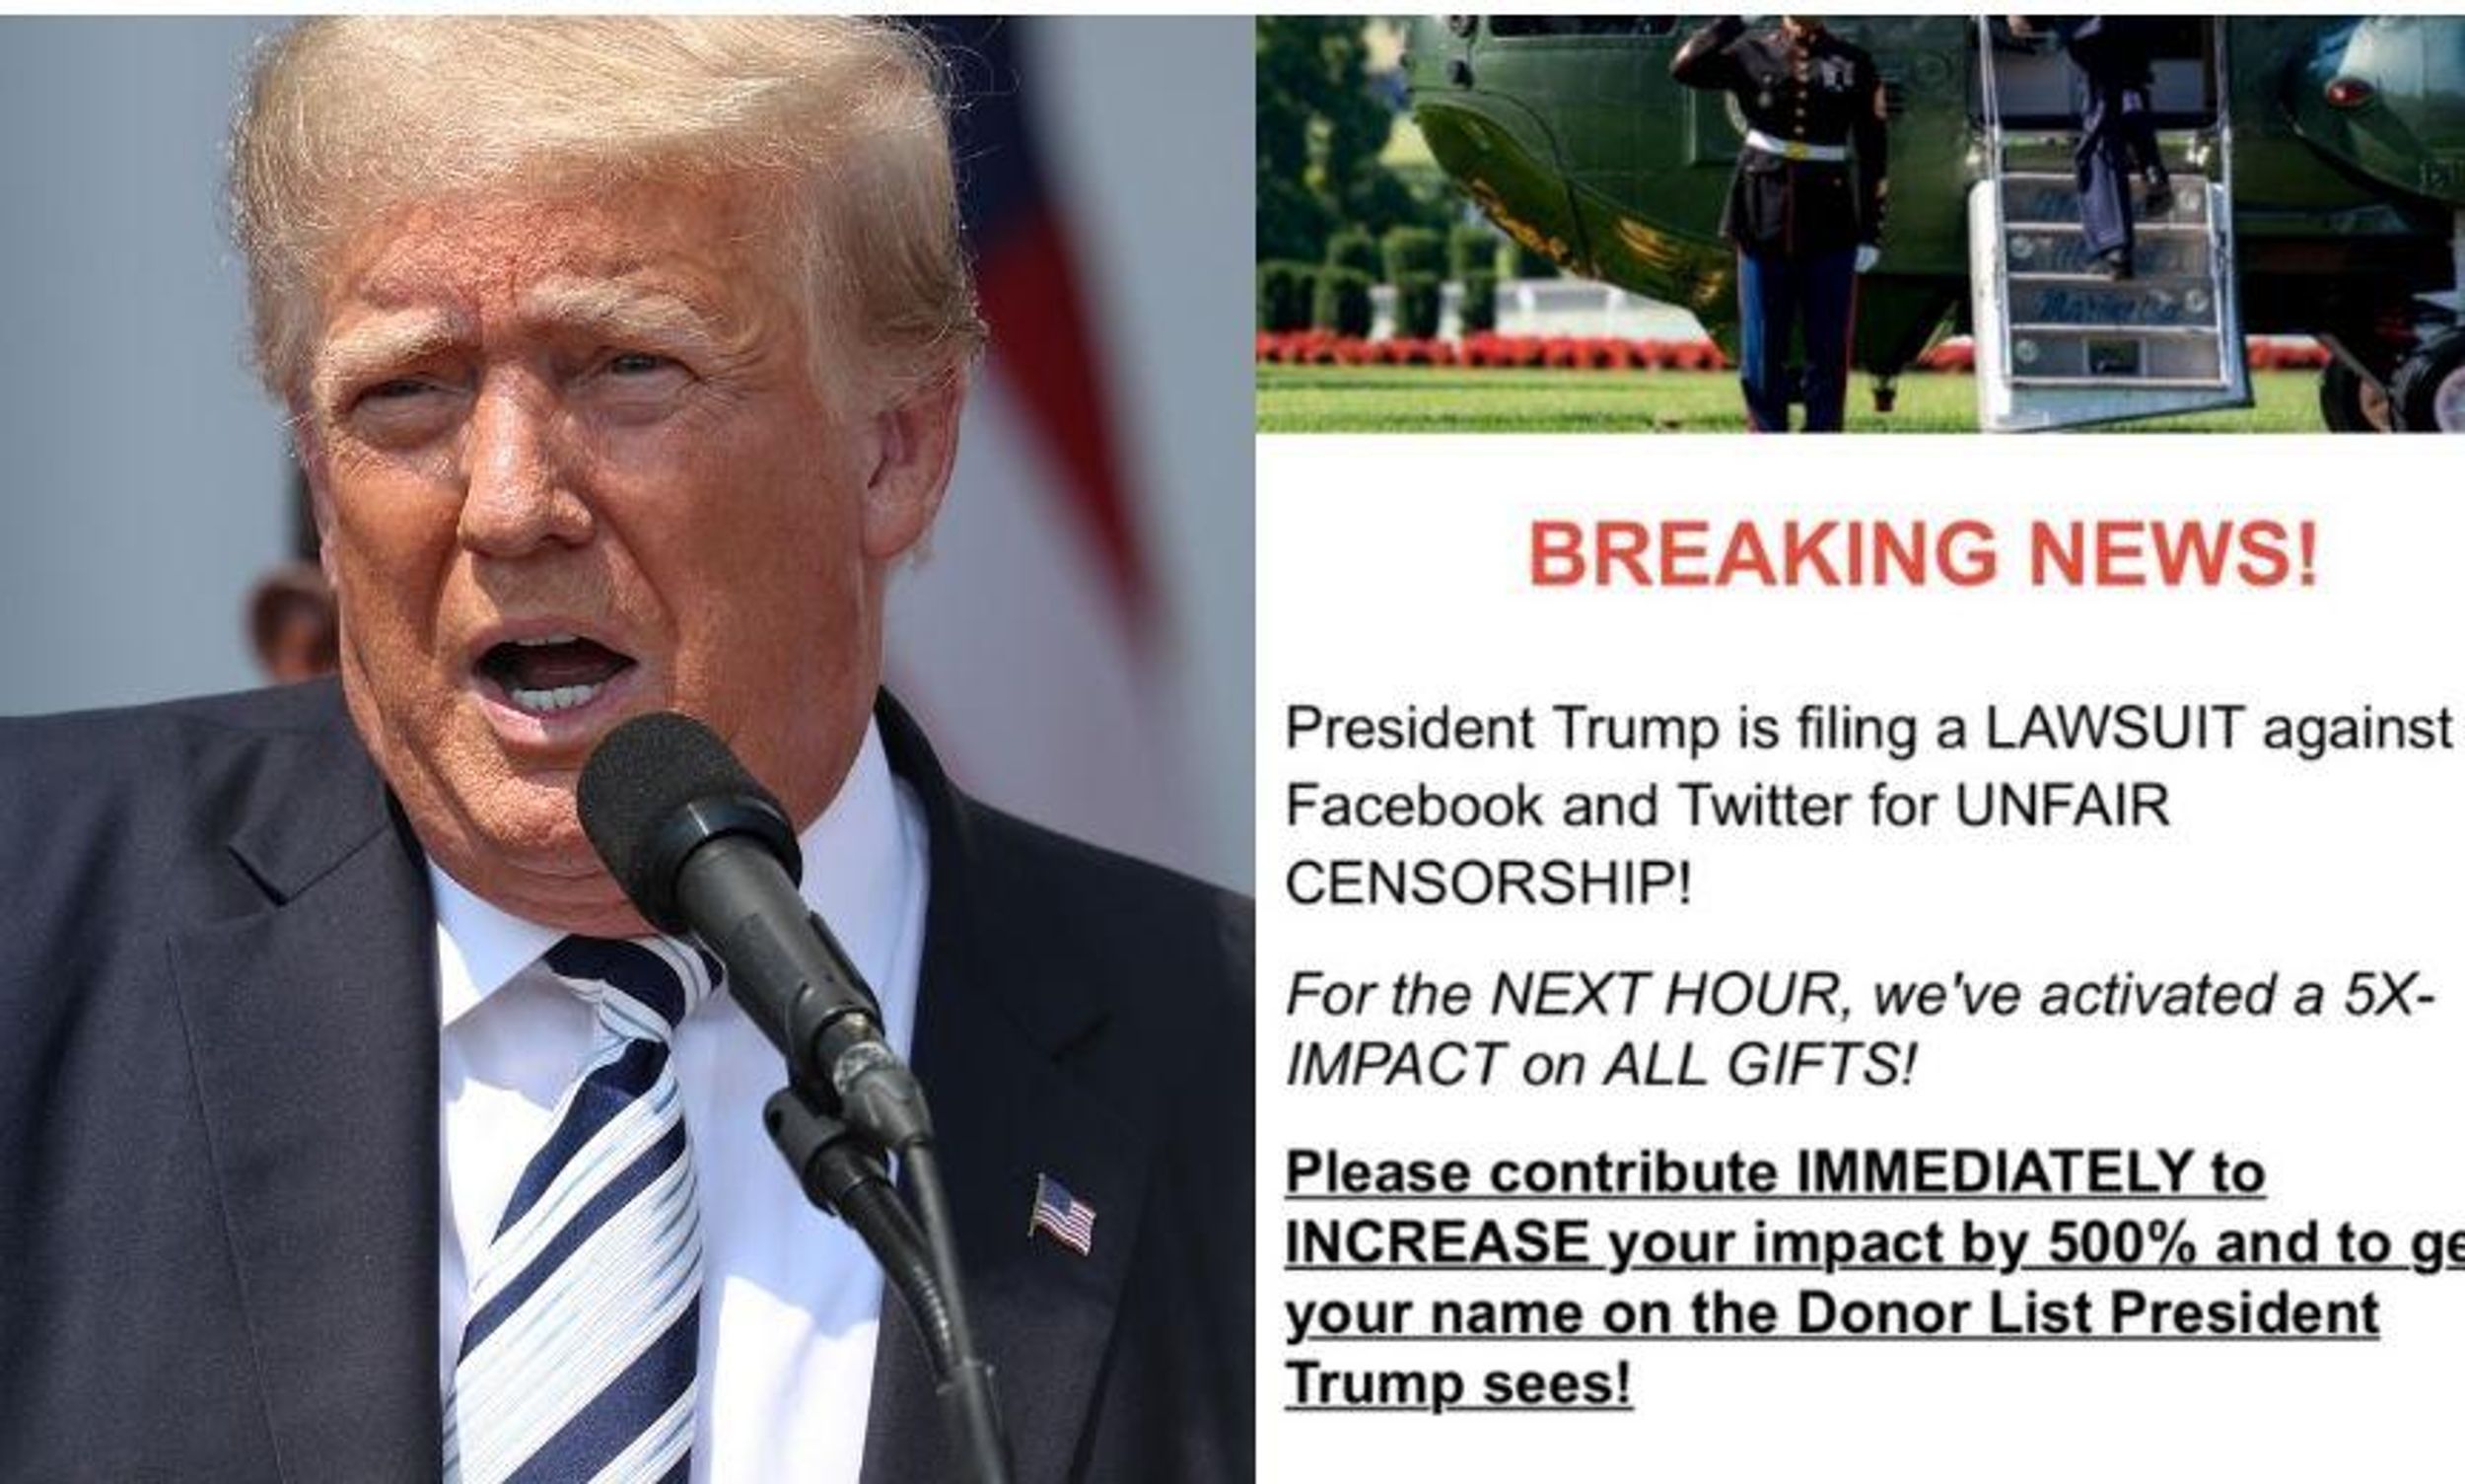 Trump Just Sued Facebook and Twitter to Get His Accounts Back and He's Already Fundraising Off It